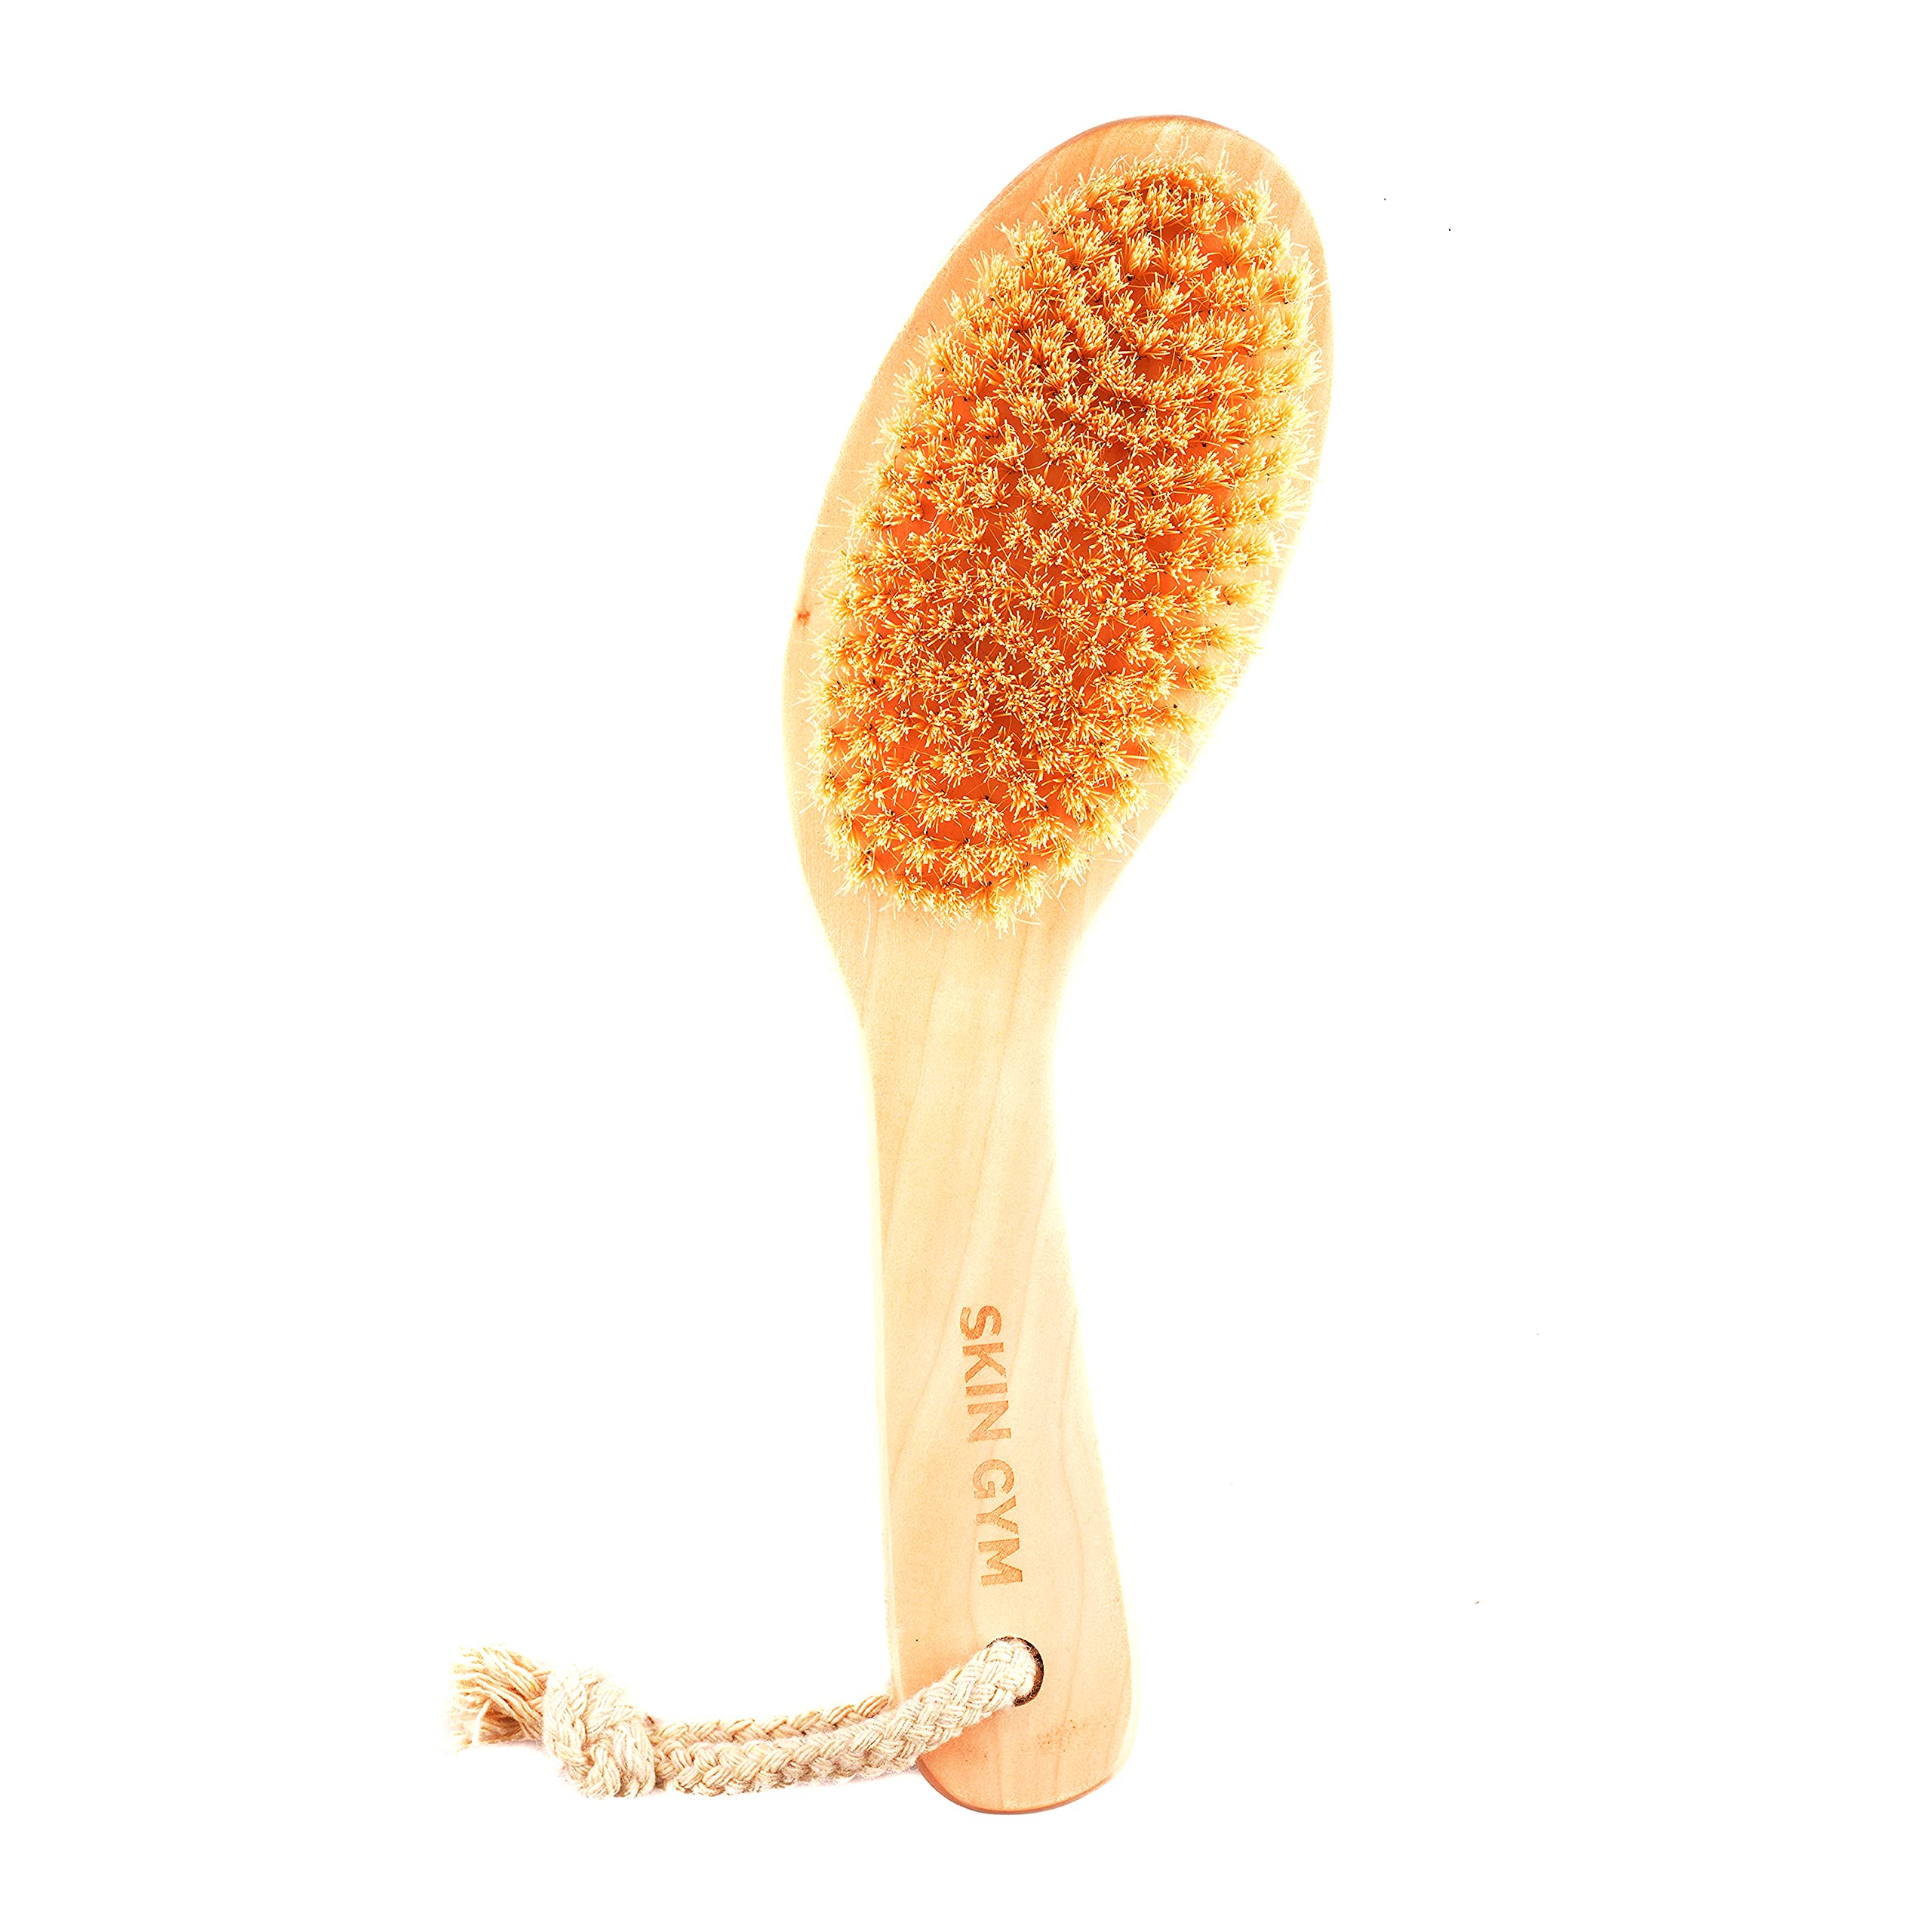 Skin Gym Dry Body Brush Exfoliating Bath Scrubber with Soft and Stiff Bristles For Cellulite Treatment, Lymphatic Drainage and Blood Circulation Improvement